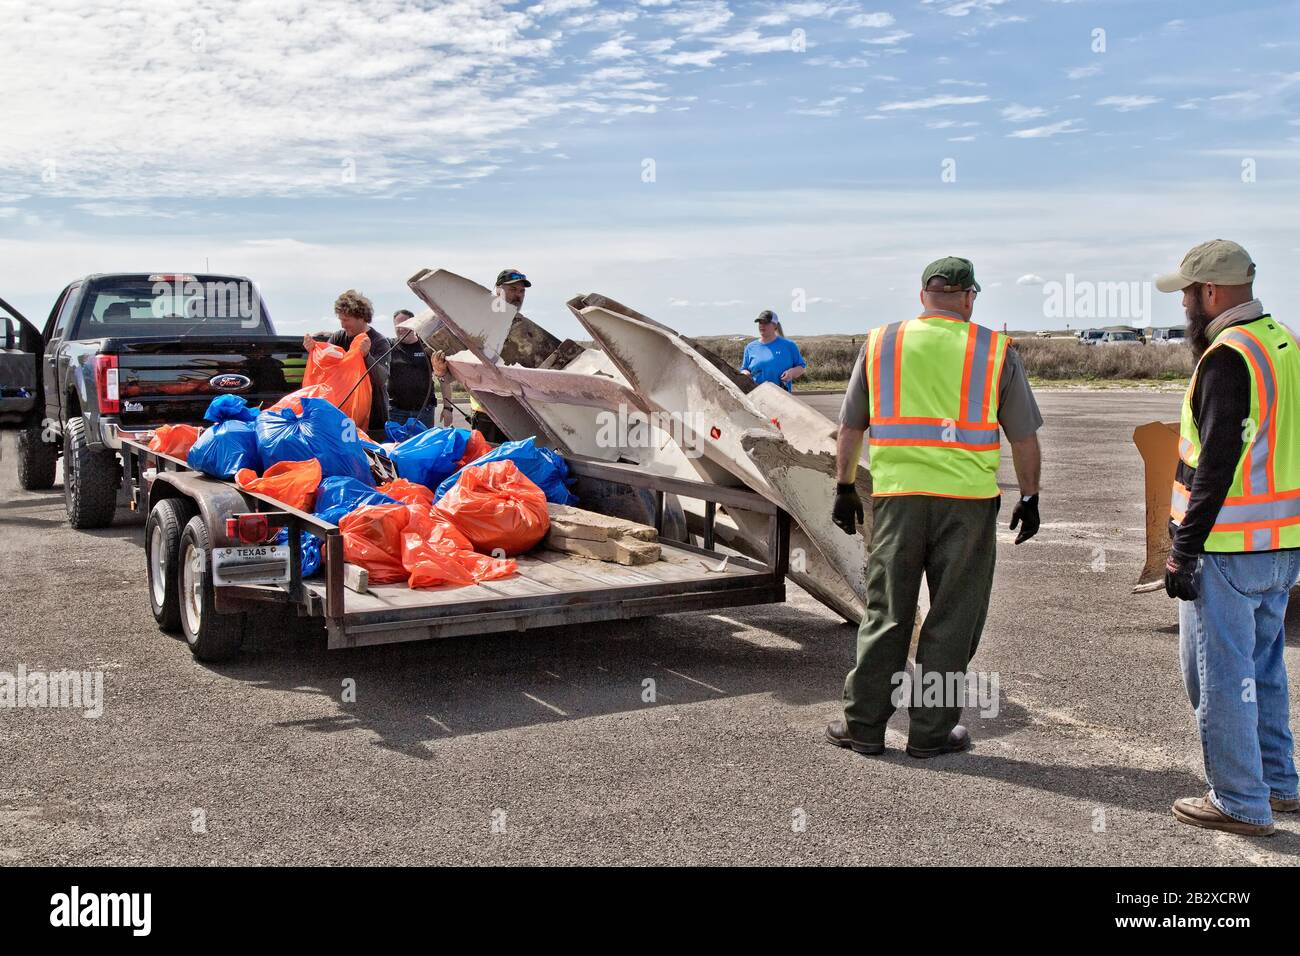 Trailer loaded with marine debris & shoreline trash collected by volunteers, unloading by park personel & participants. Stock Photo